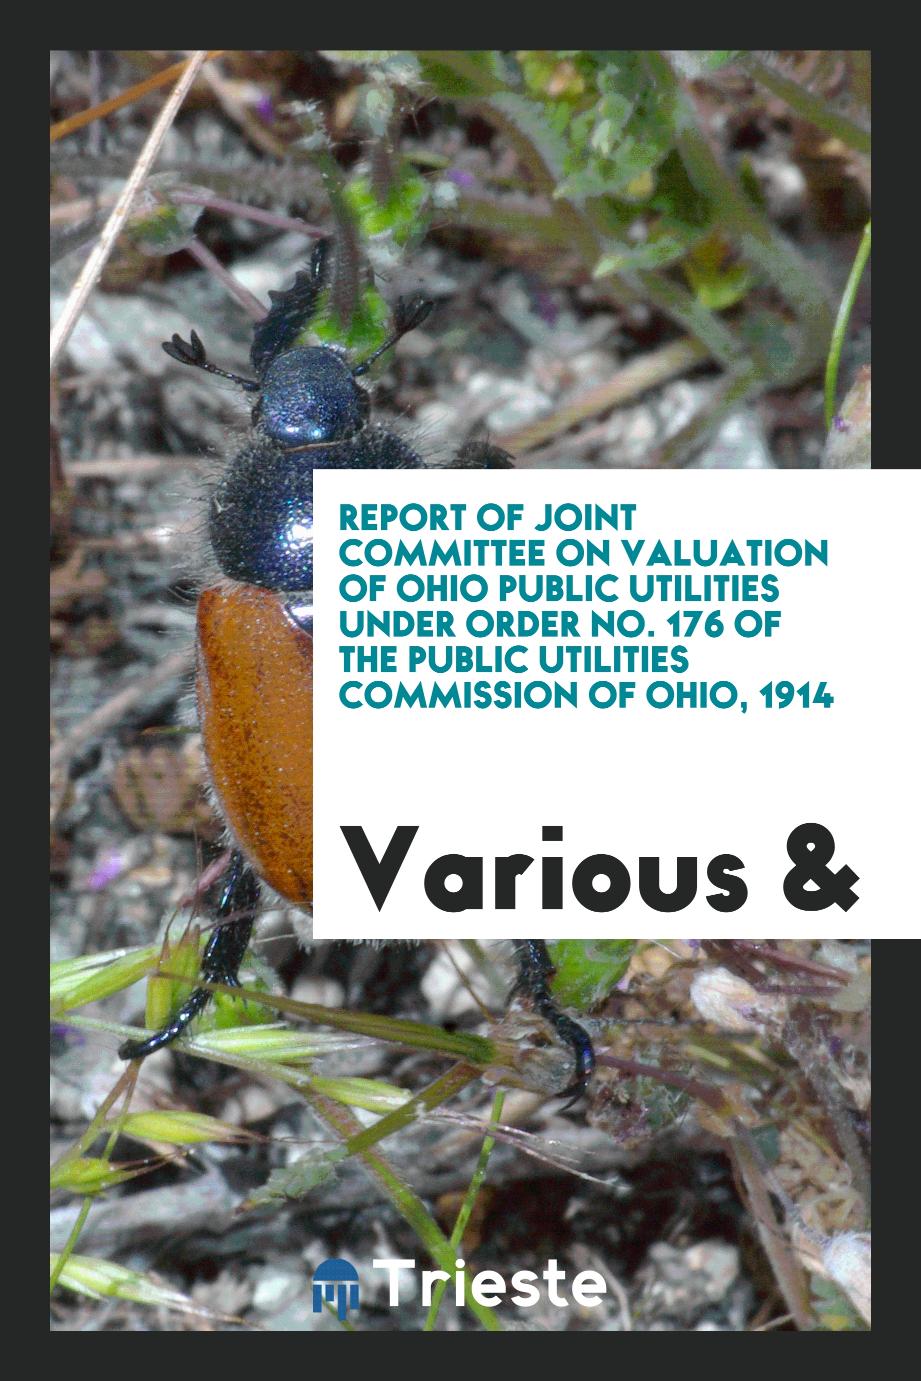 Report of Joint committee on valuation of Ohio public utilities under order no. 176 of the Public utilities commission of Ohio, 1914